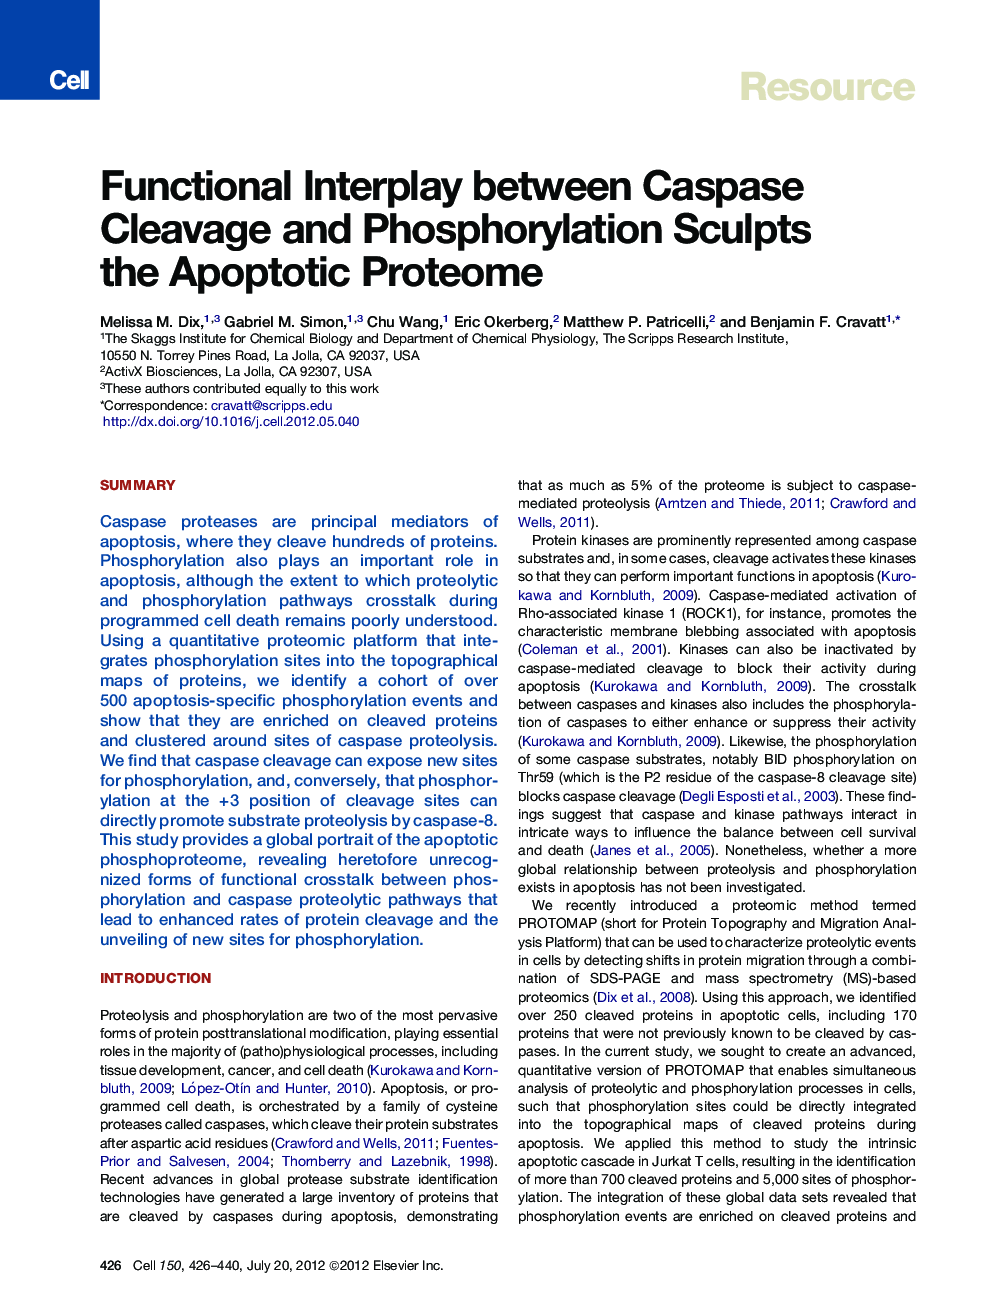 Functional Interplay between Caspase Cleavage and Phosphorylation Sculpts the Apoptotic Proteome